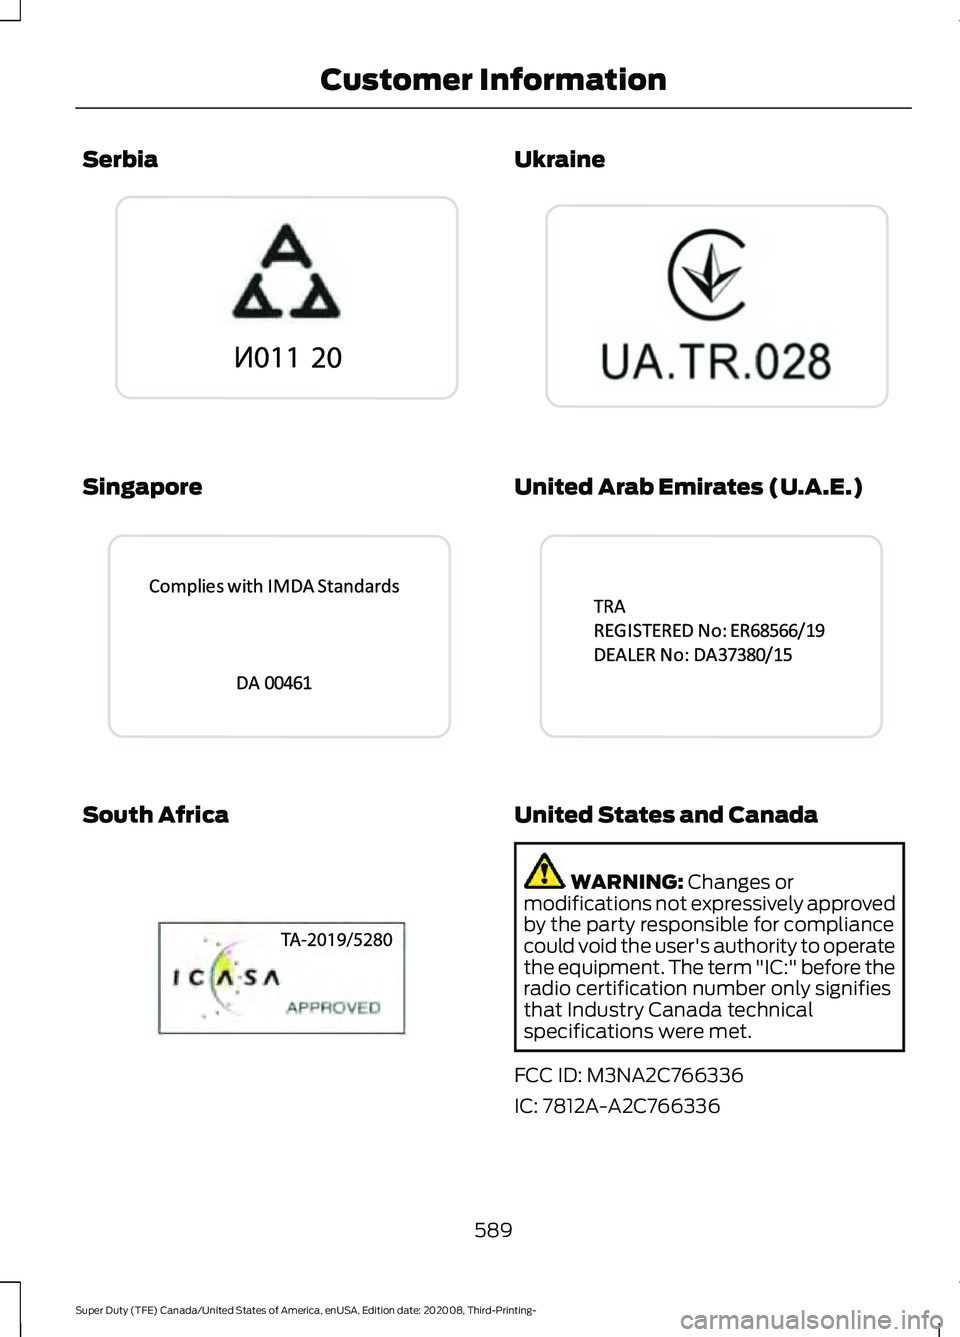 FORD F-450 2021  Owners Manual Serbia
Singapore
South Africa Ukraine
United Arab Emirates (U.A.E.)
United States and Canada
WARNING: Changes or
modifications not expressively approved
by the party responsible for compliance
could v